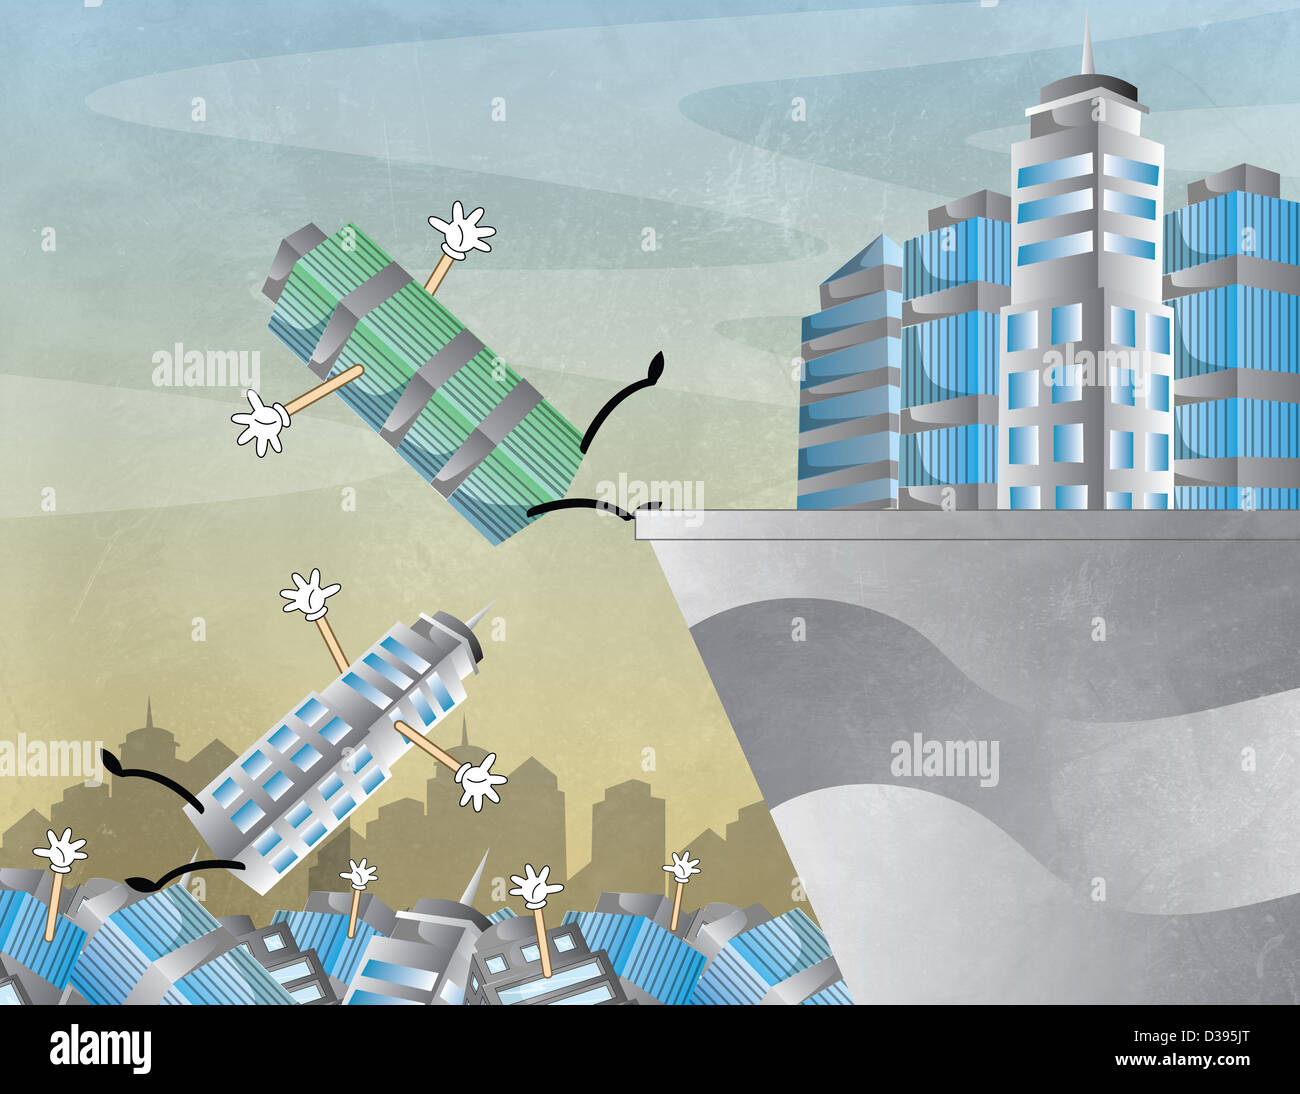 Falling buildings representing the concept of business uncertainty Stock Photo